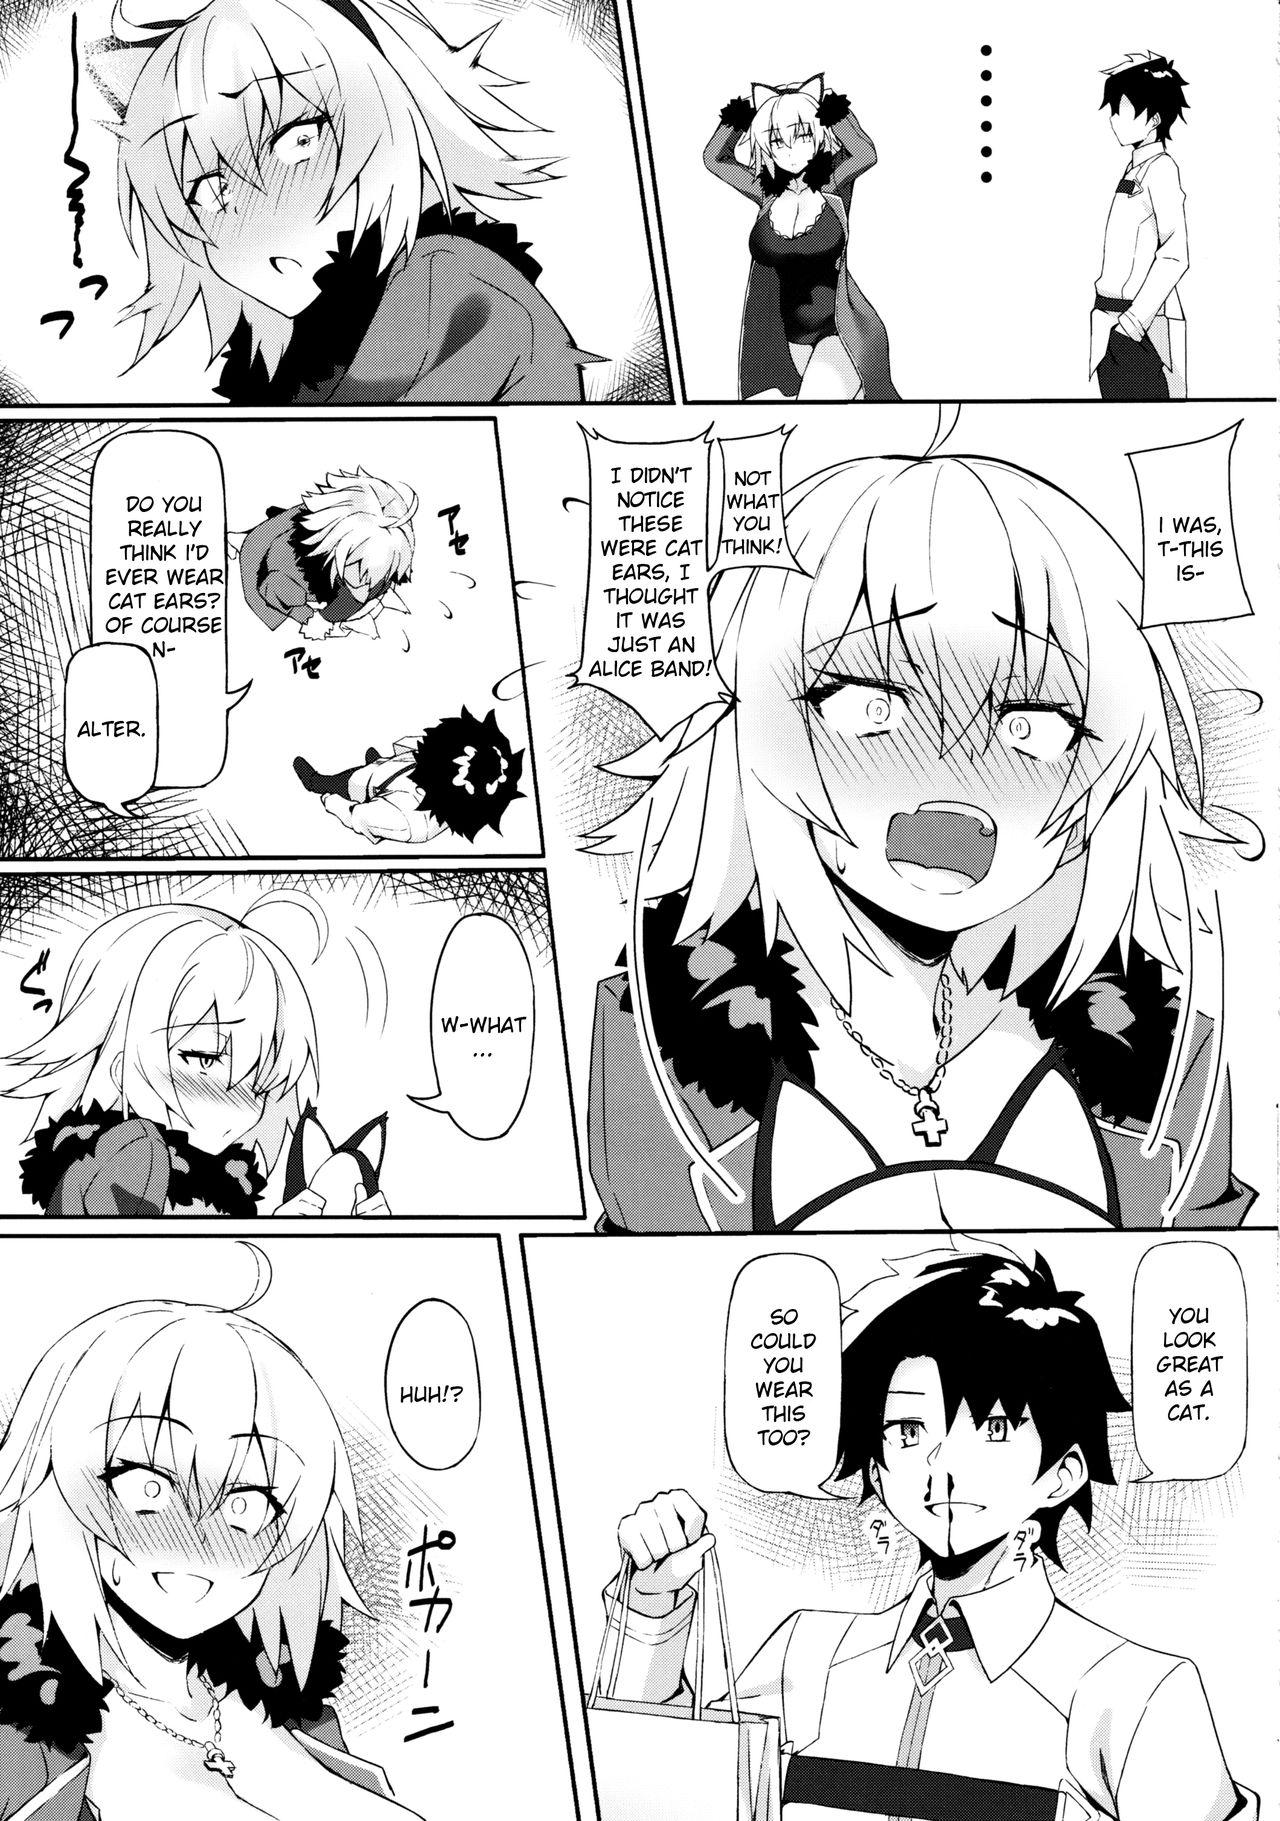 Rough Sex Nekomimi Jeanne to Hitasura Koubi Suru Hon | Mating earnestly with cat ears Jalter - Fate grand order Ass Fetish - Page 4